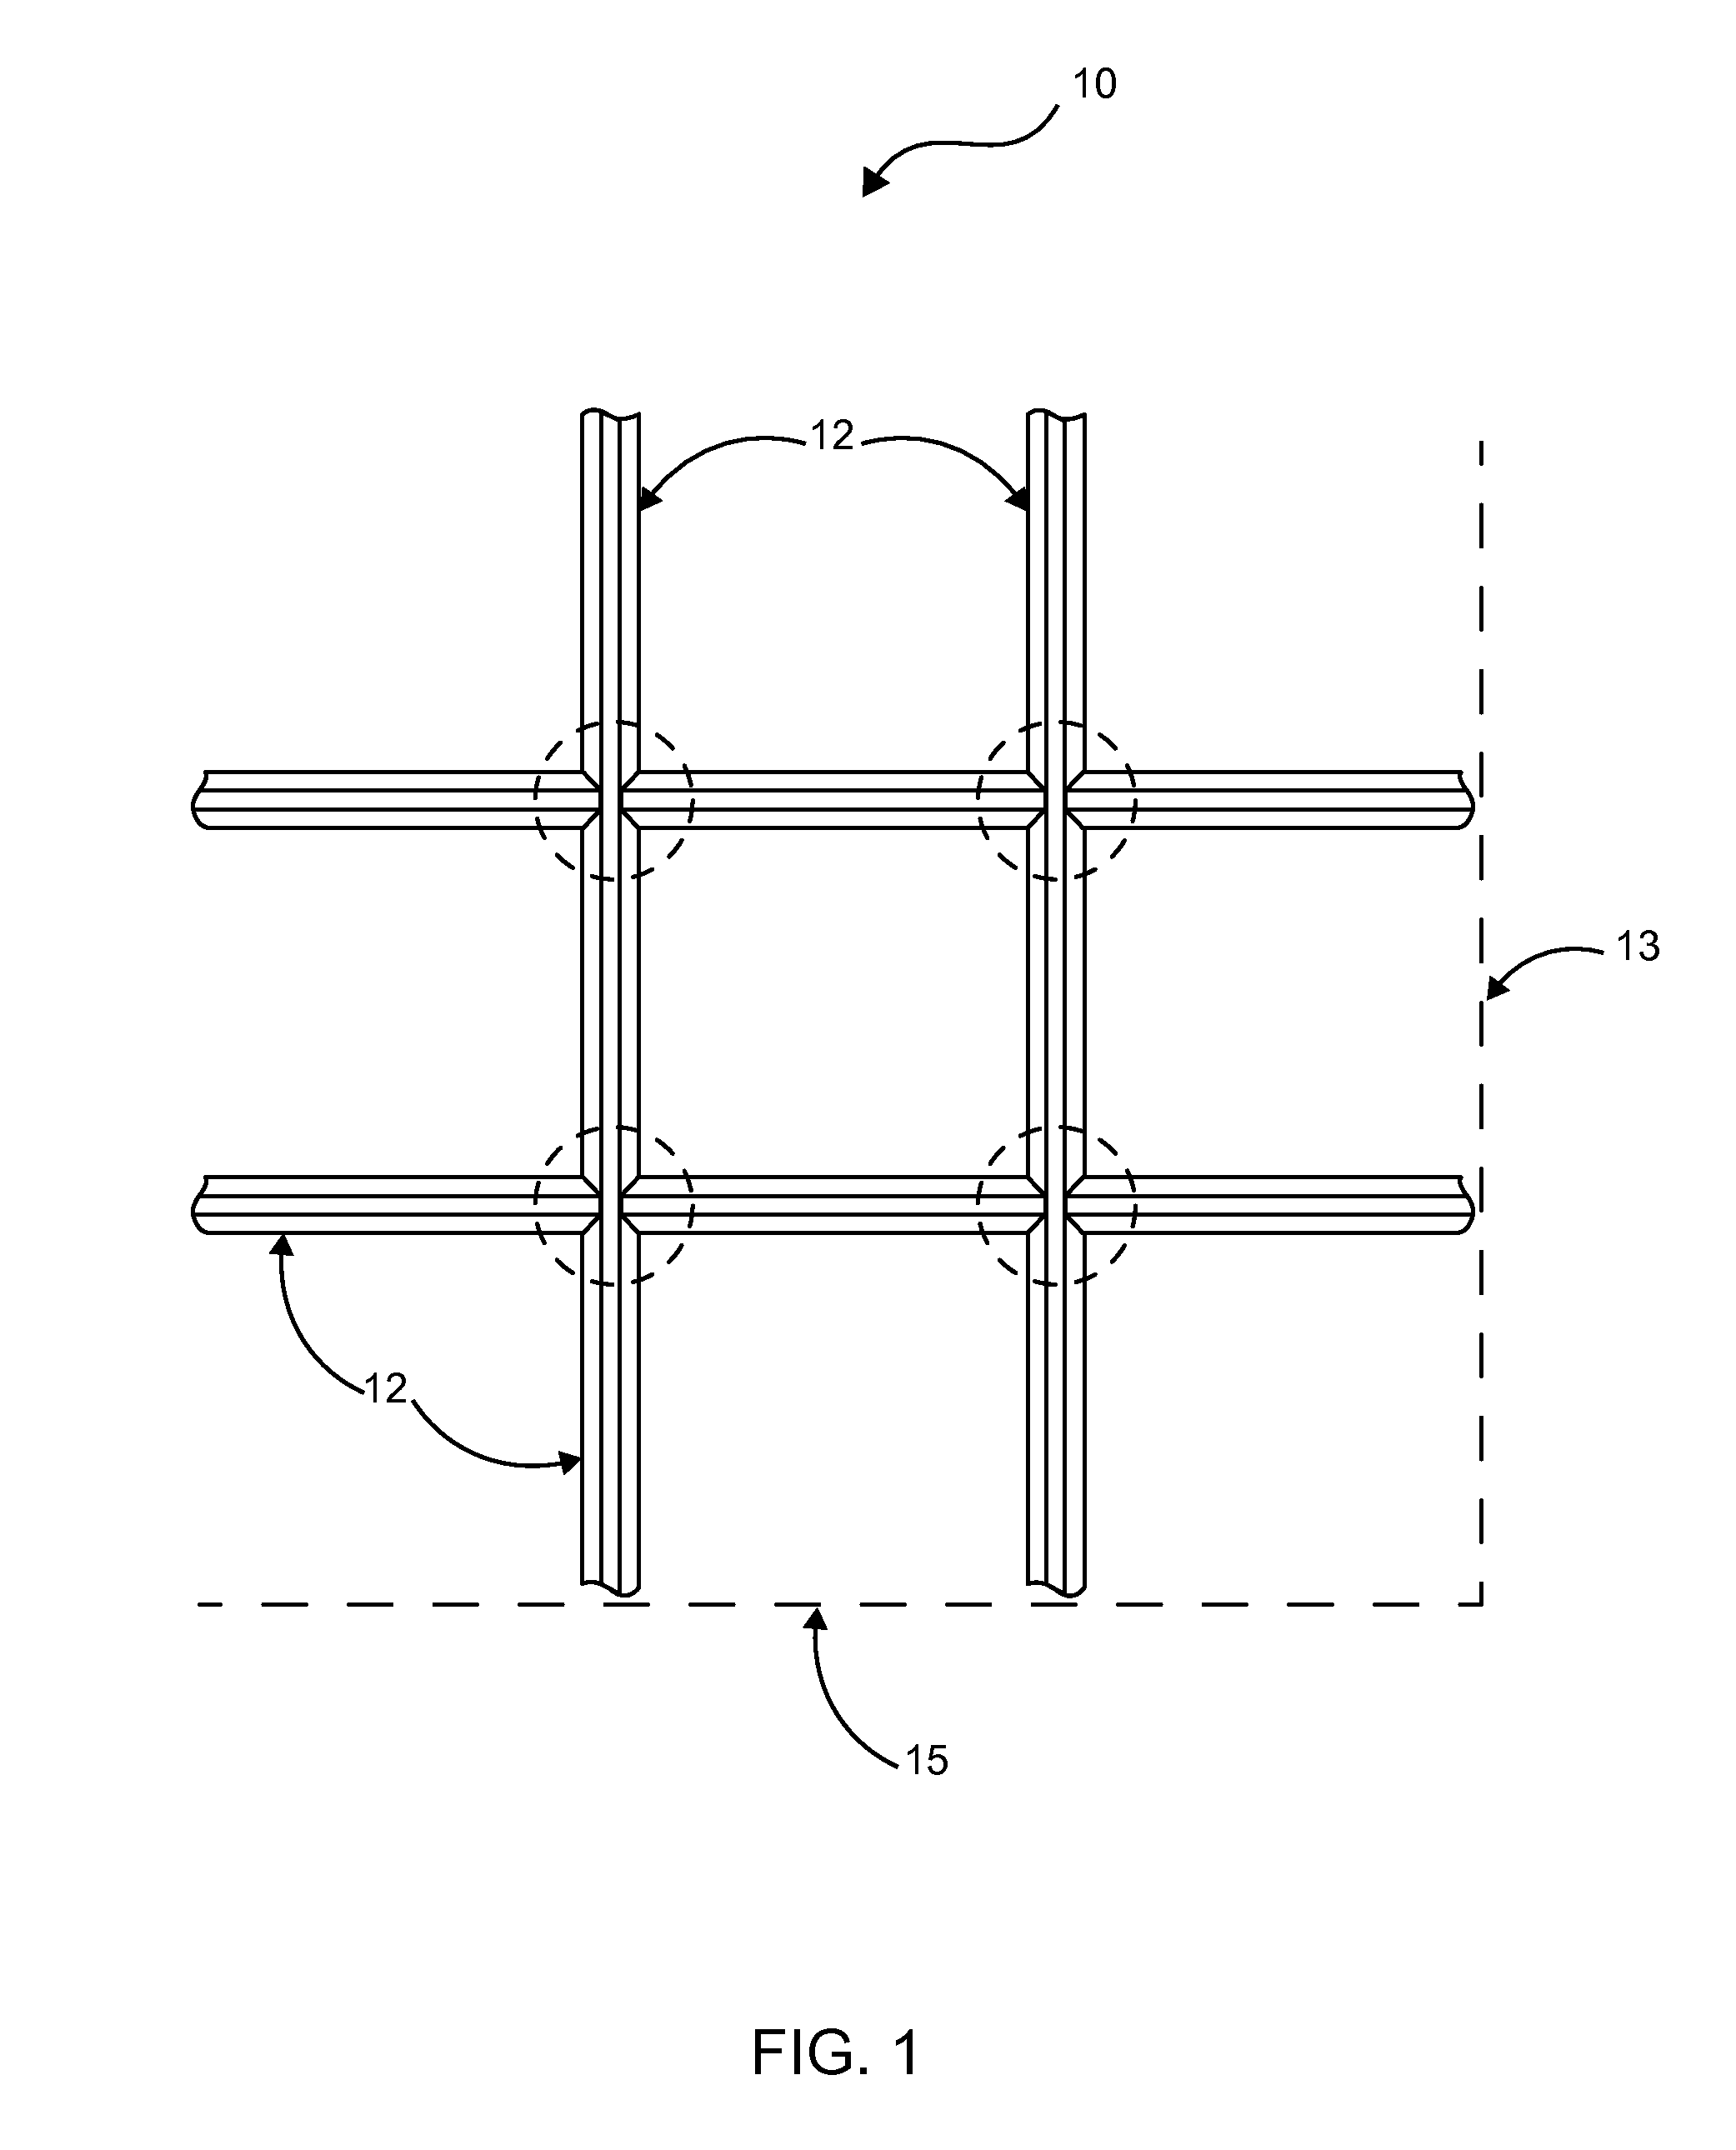 Method and Apparatus For Assembling Simulated Divided Light Window Grids